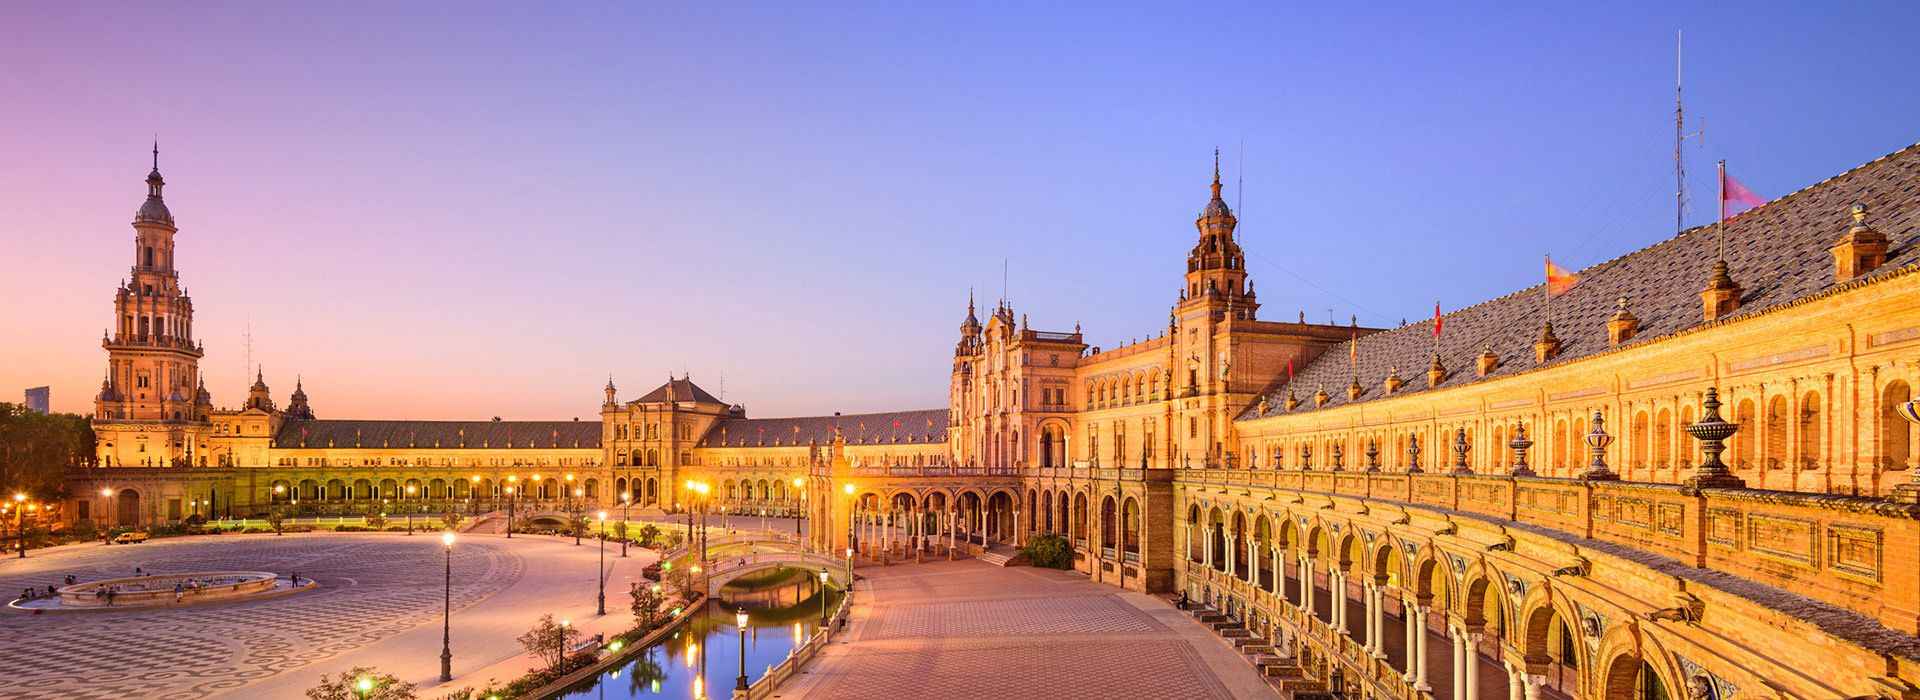 Spain Travel Guide - Travel Insights and Tips